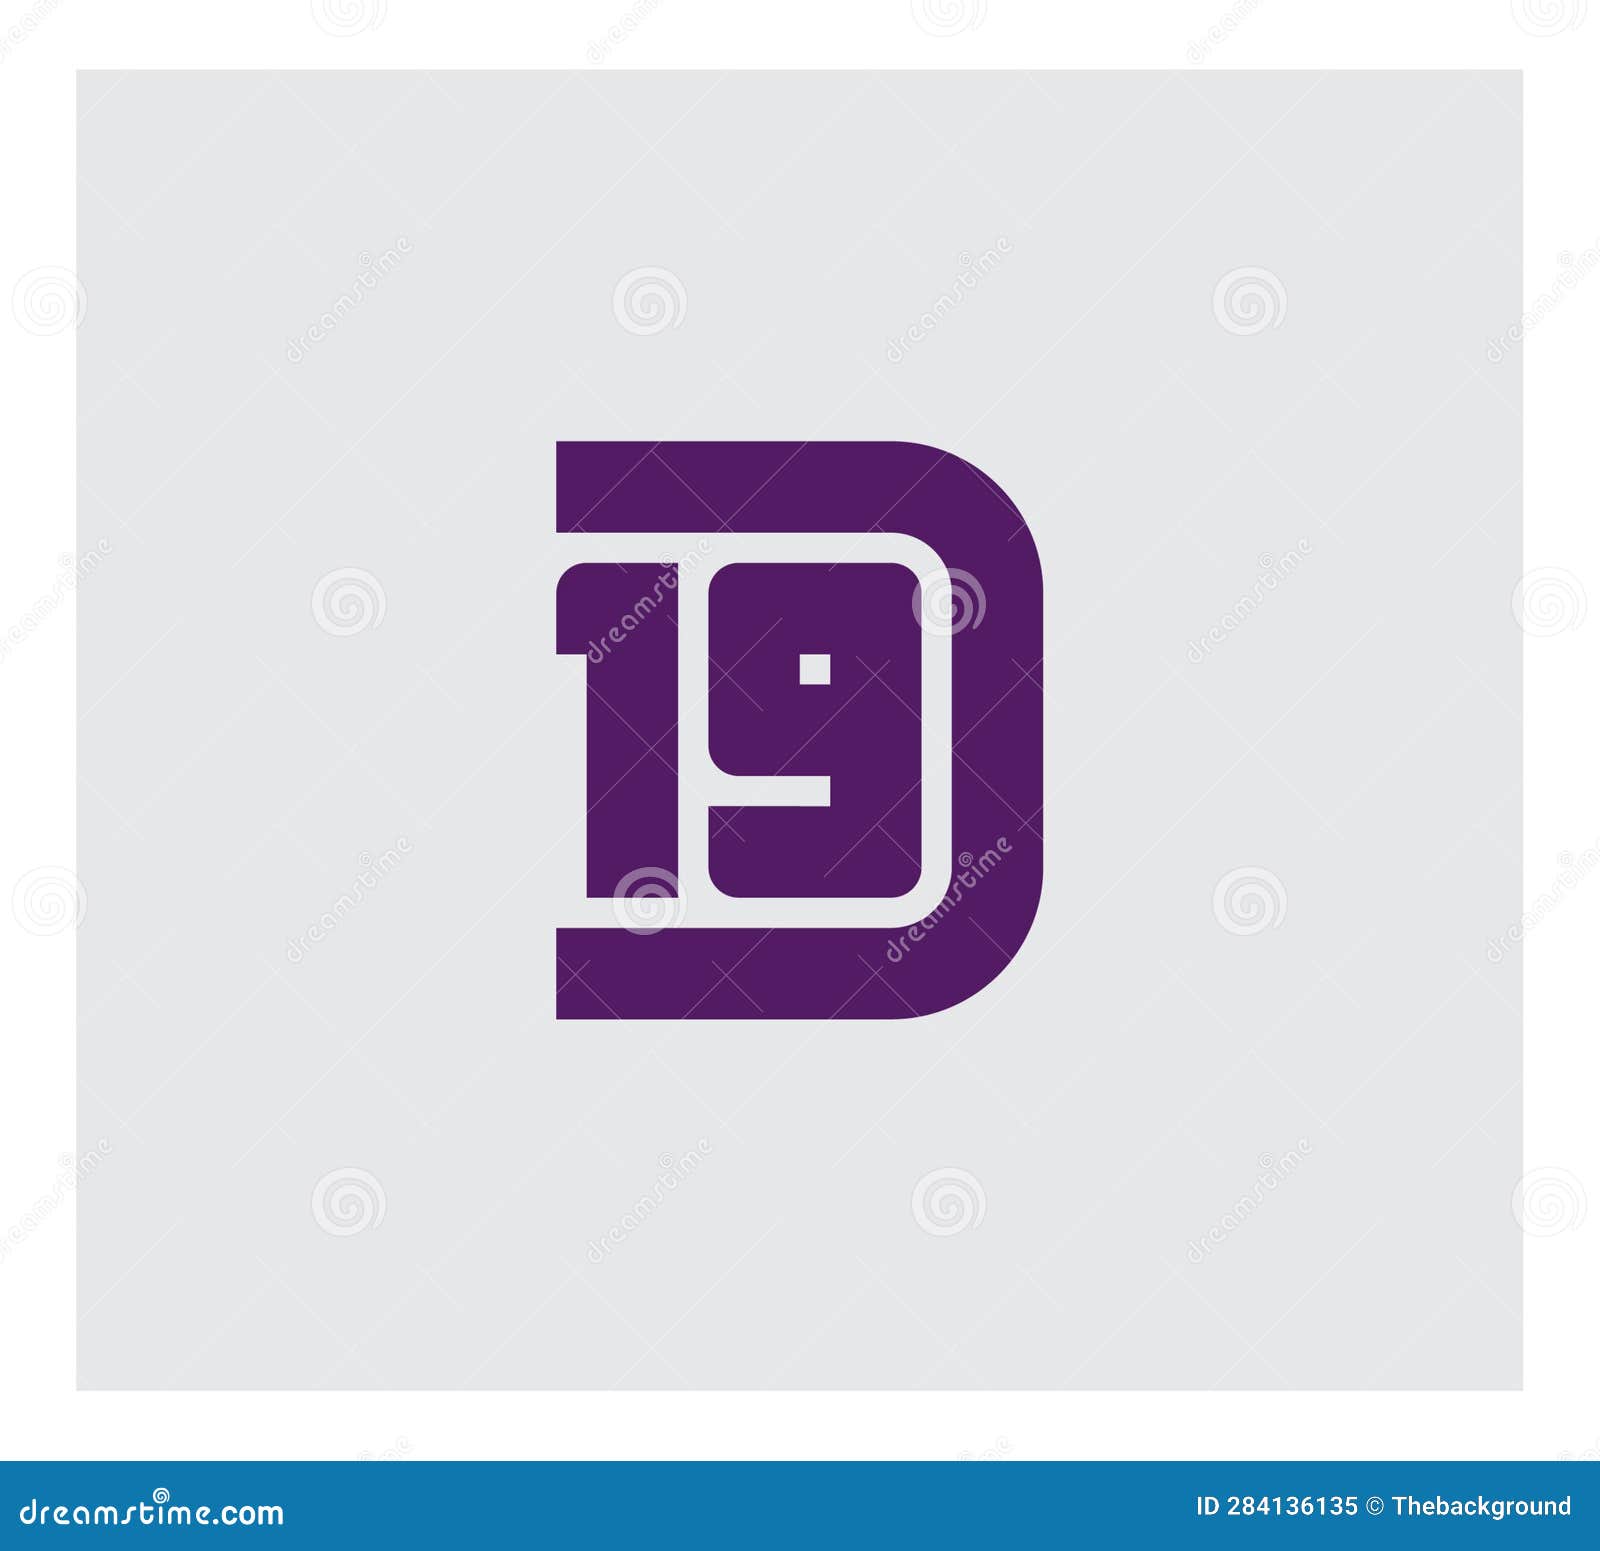 d19 or 19d - elegant universal  sign. graphic  for corporate business identity. number 19 and letter d - logo 